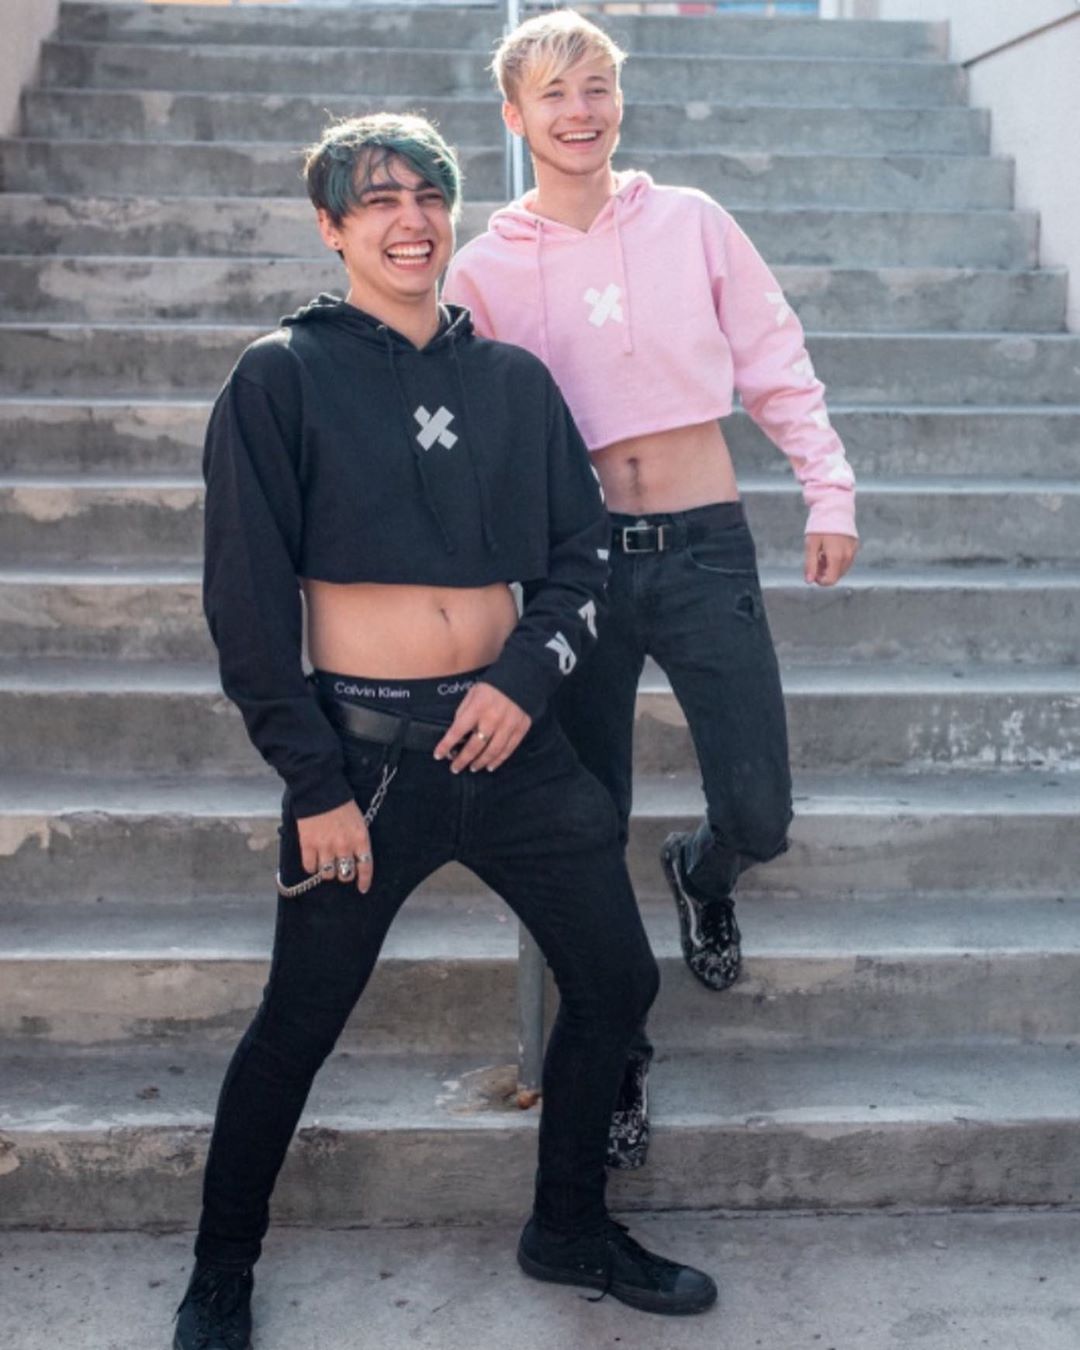 Sam and Colby wallpaper ideas. sam and colby, colby, colby brock